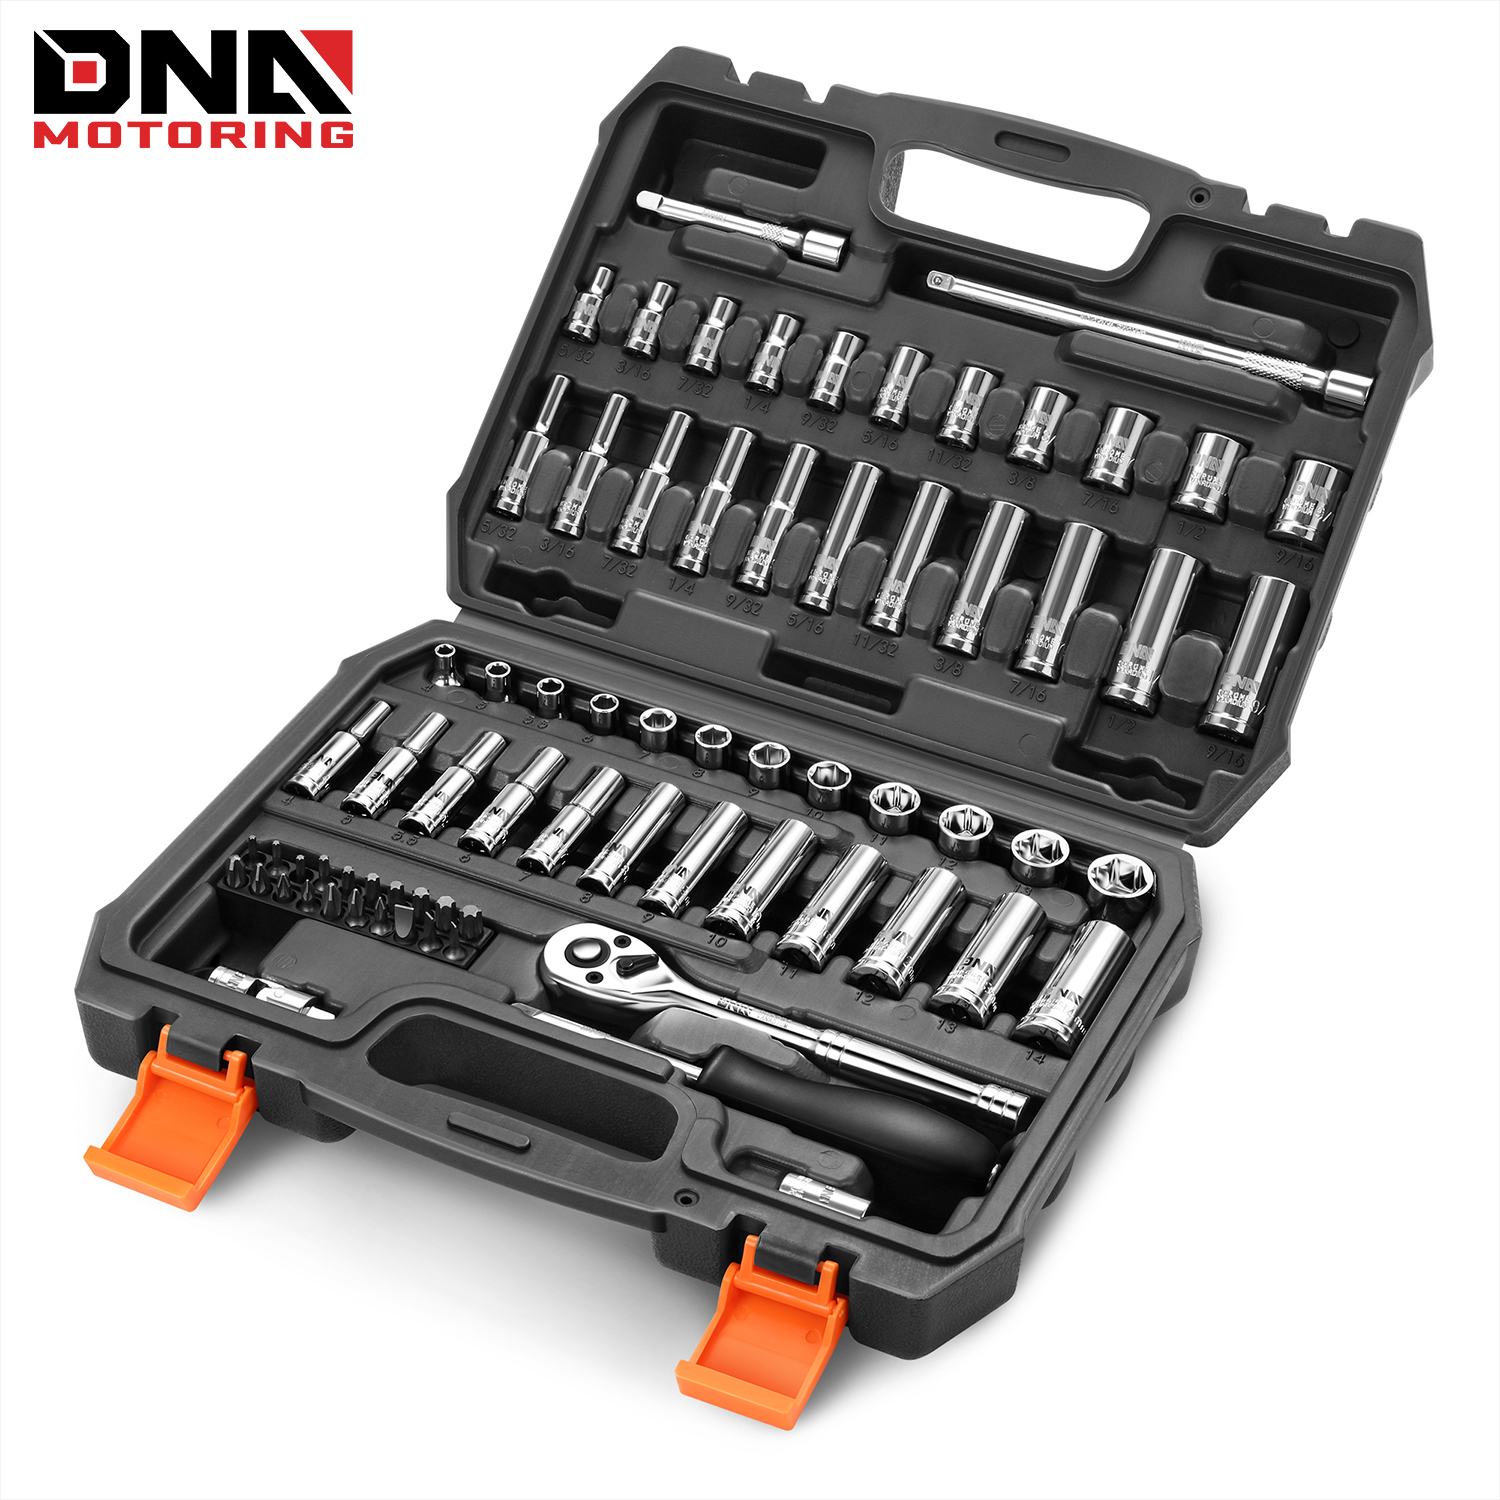 

72-piece 1/4" Drive Socket Set With Ratchets, Adapters, Extensions - 4mm -14mm, 5/32 Inch- 9/16 Inch, Cr-v